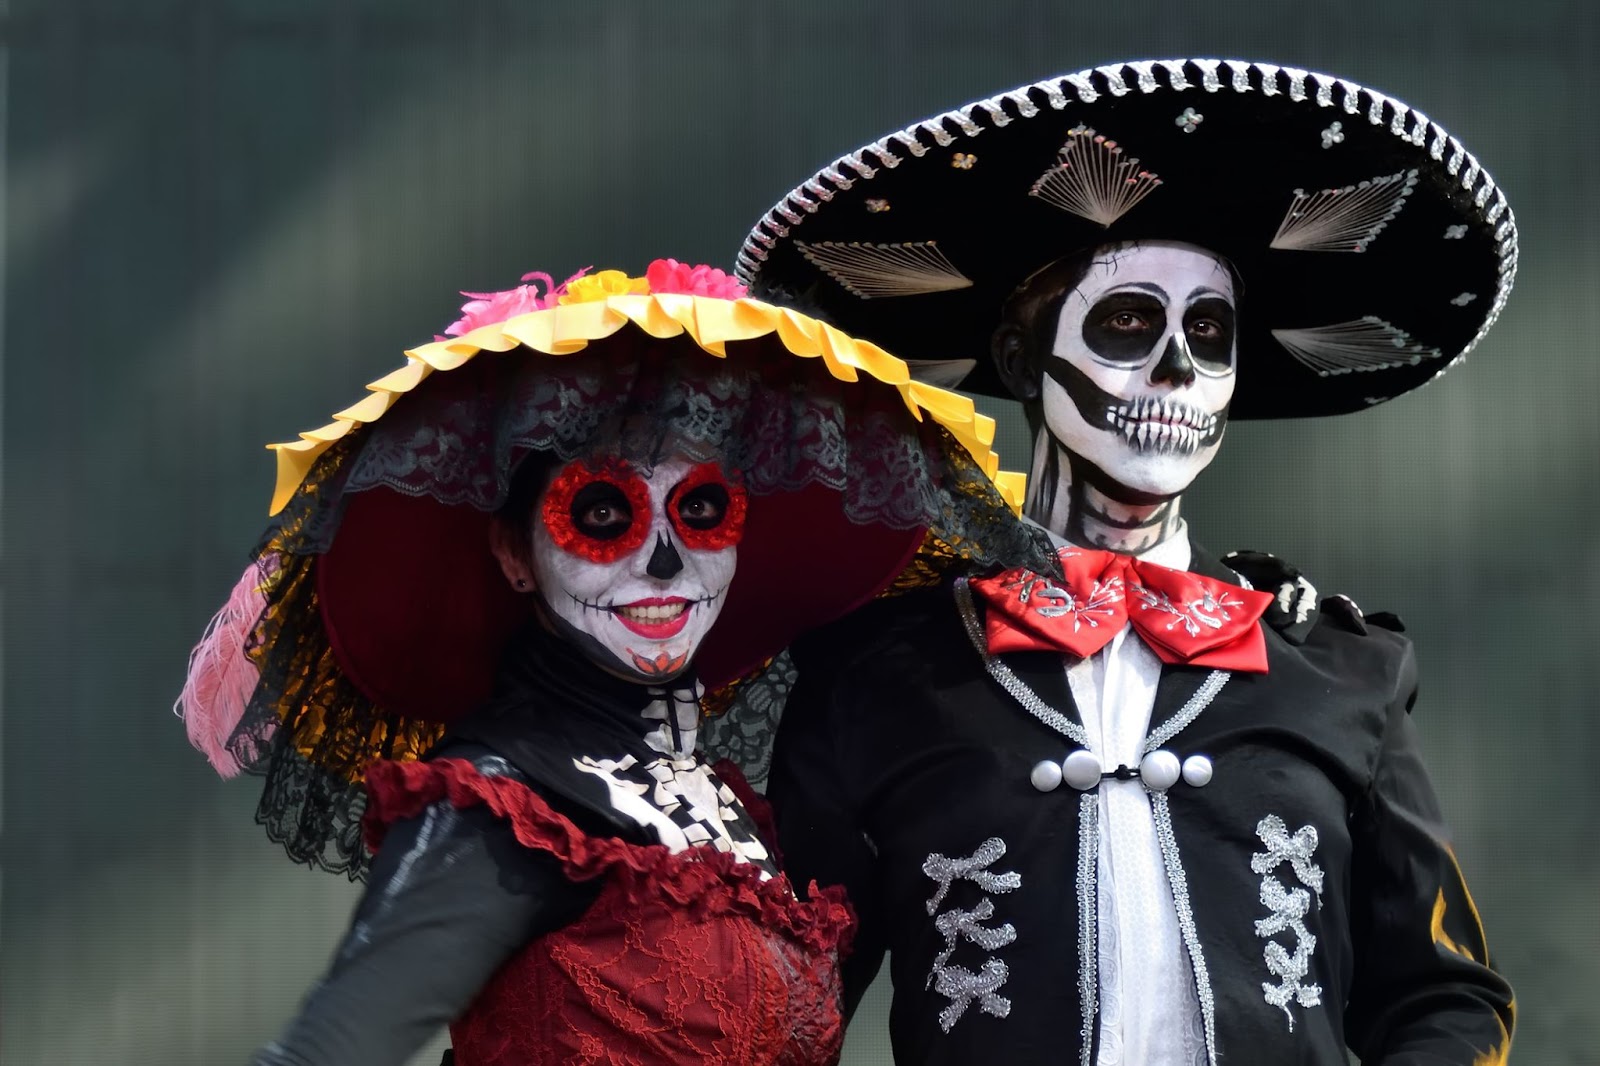 comida Representar mordaz Day of the Dead in Spanish: Mexican Culture and Traditions